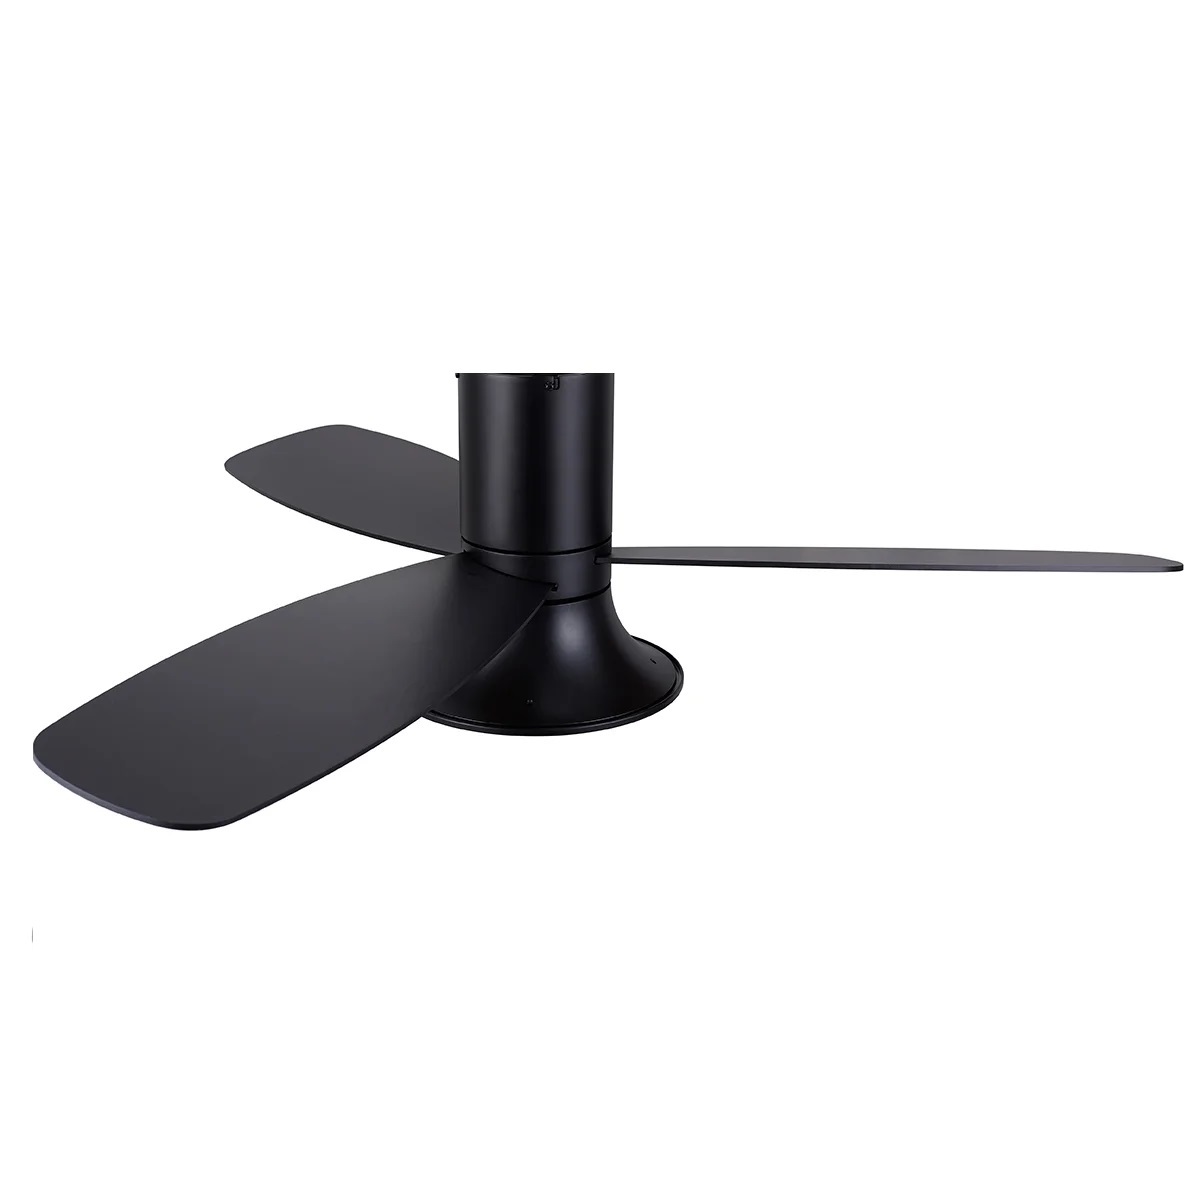 FLUSSO Black ceiling fan &Oslash;132cm light integrated and remote control included